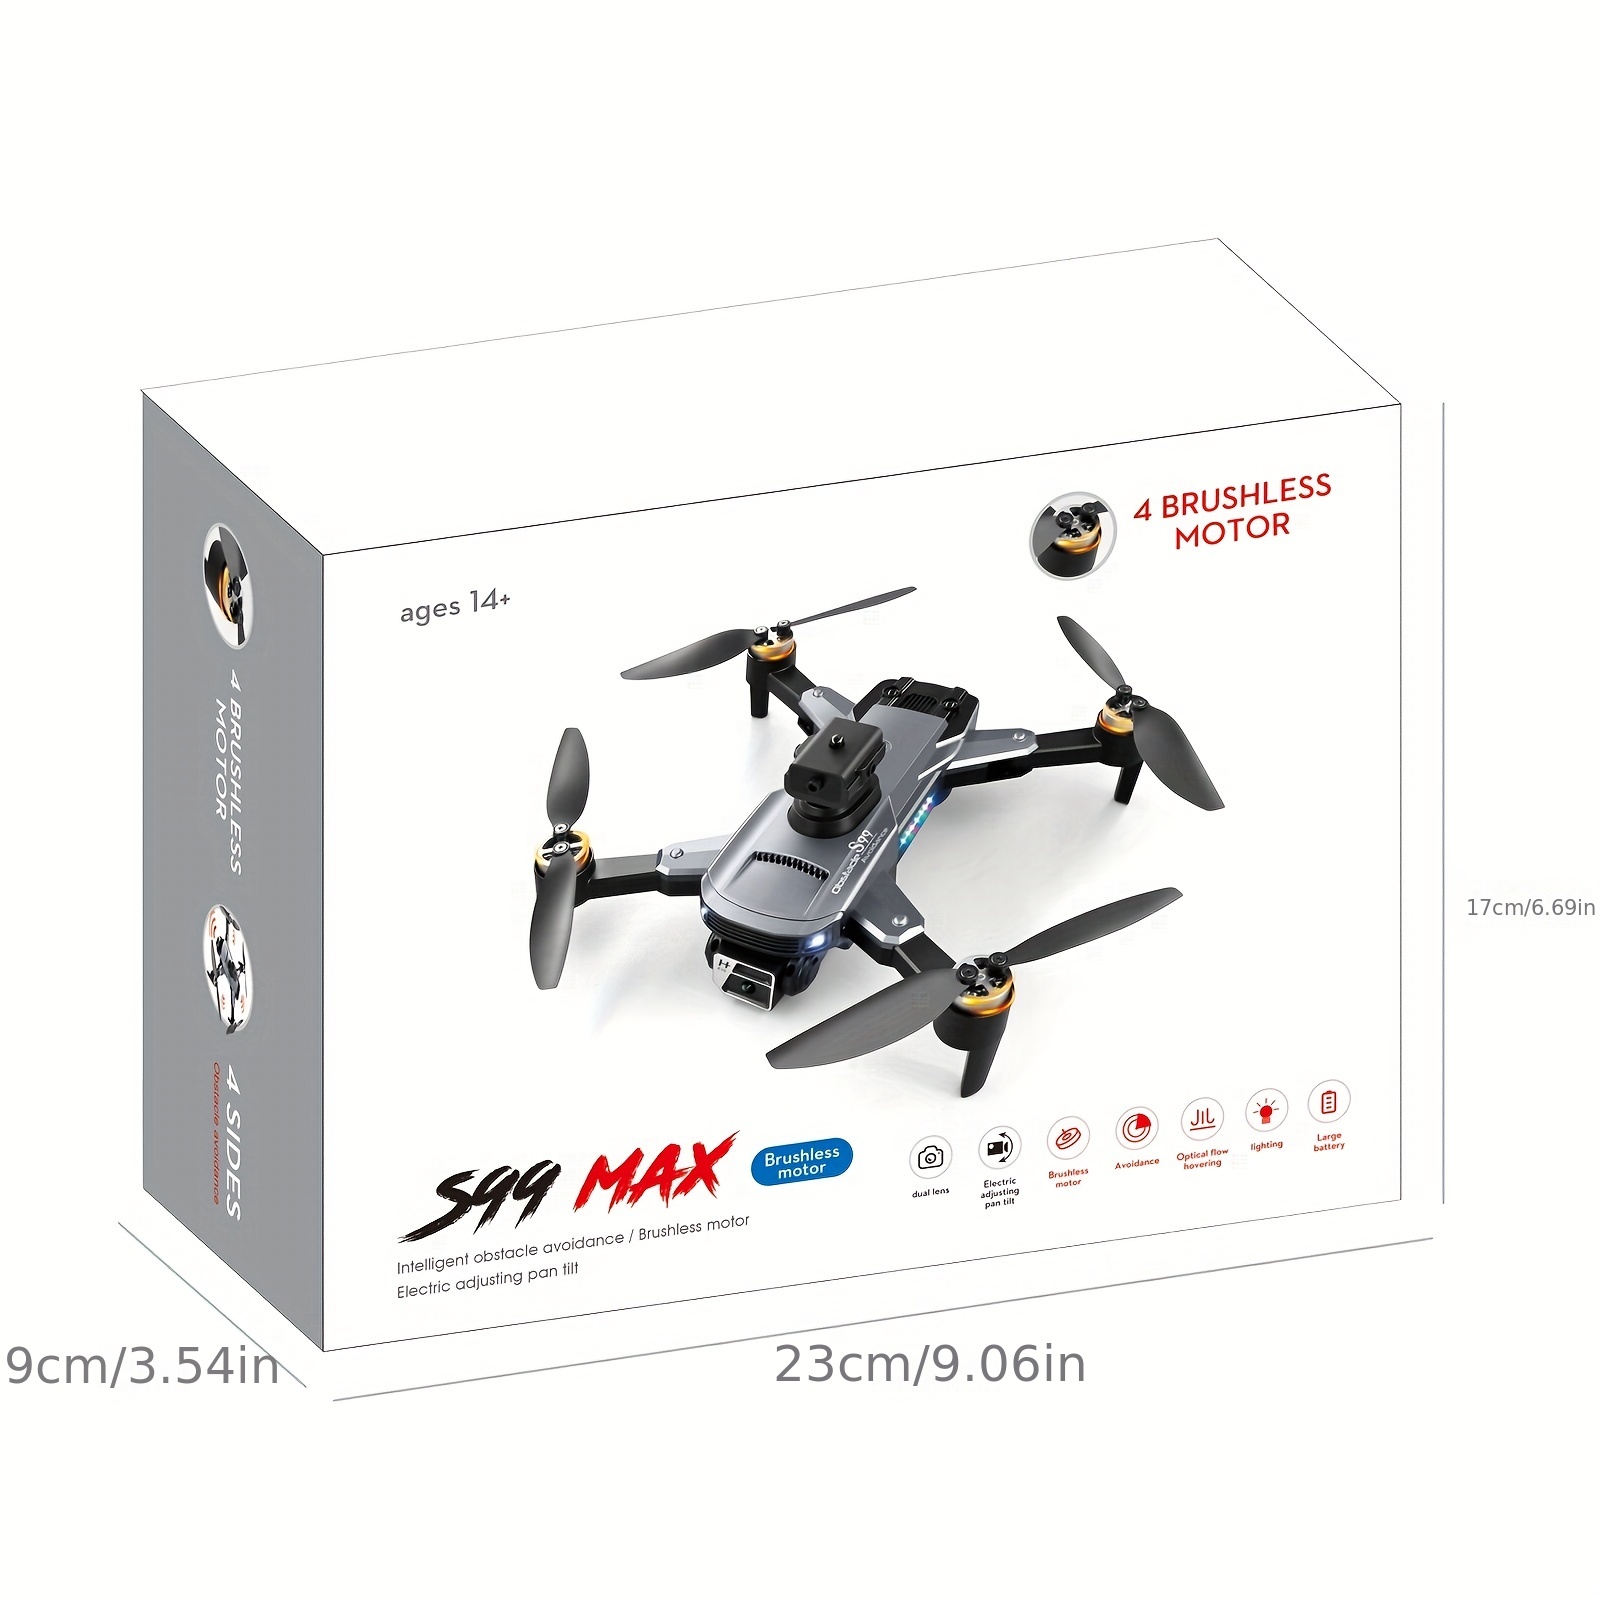 paxa s99 5g gps drone led colored lights hd real time aerial photography obstacle avoidance quadrotor helicopter rc distance 100m uav details 21